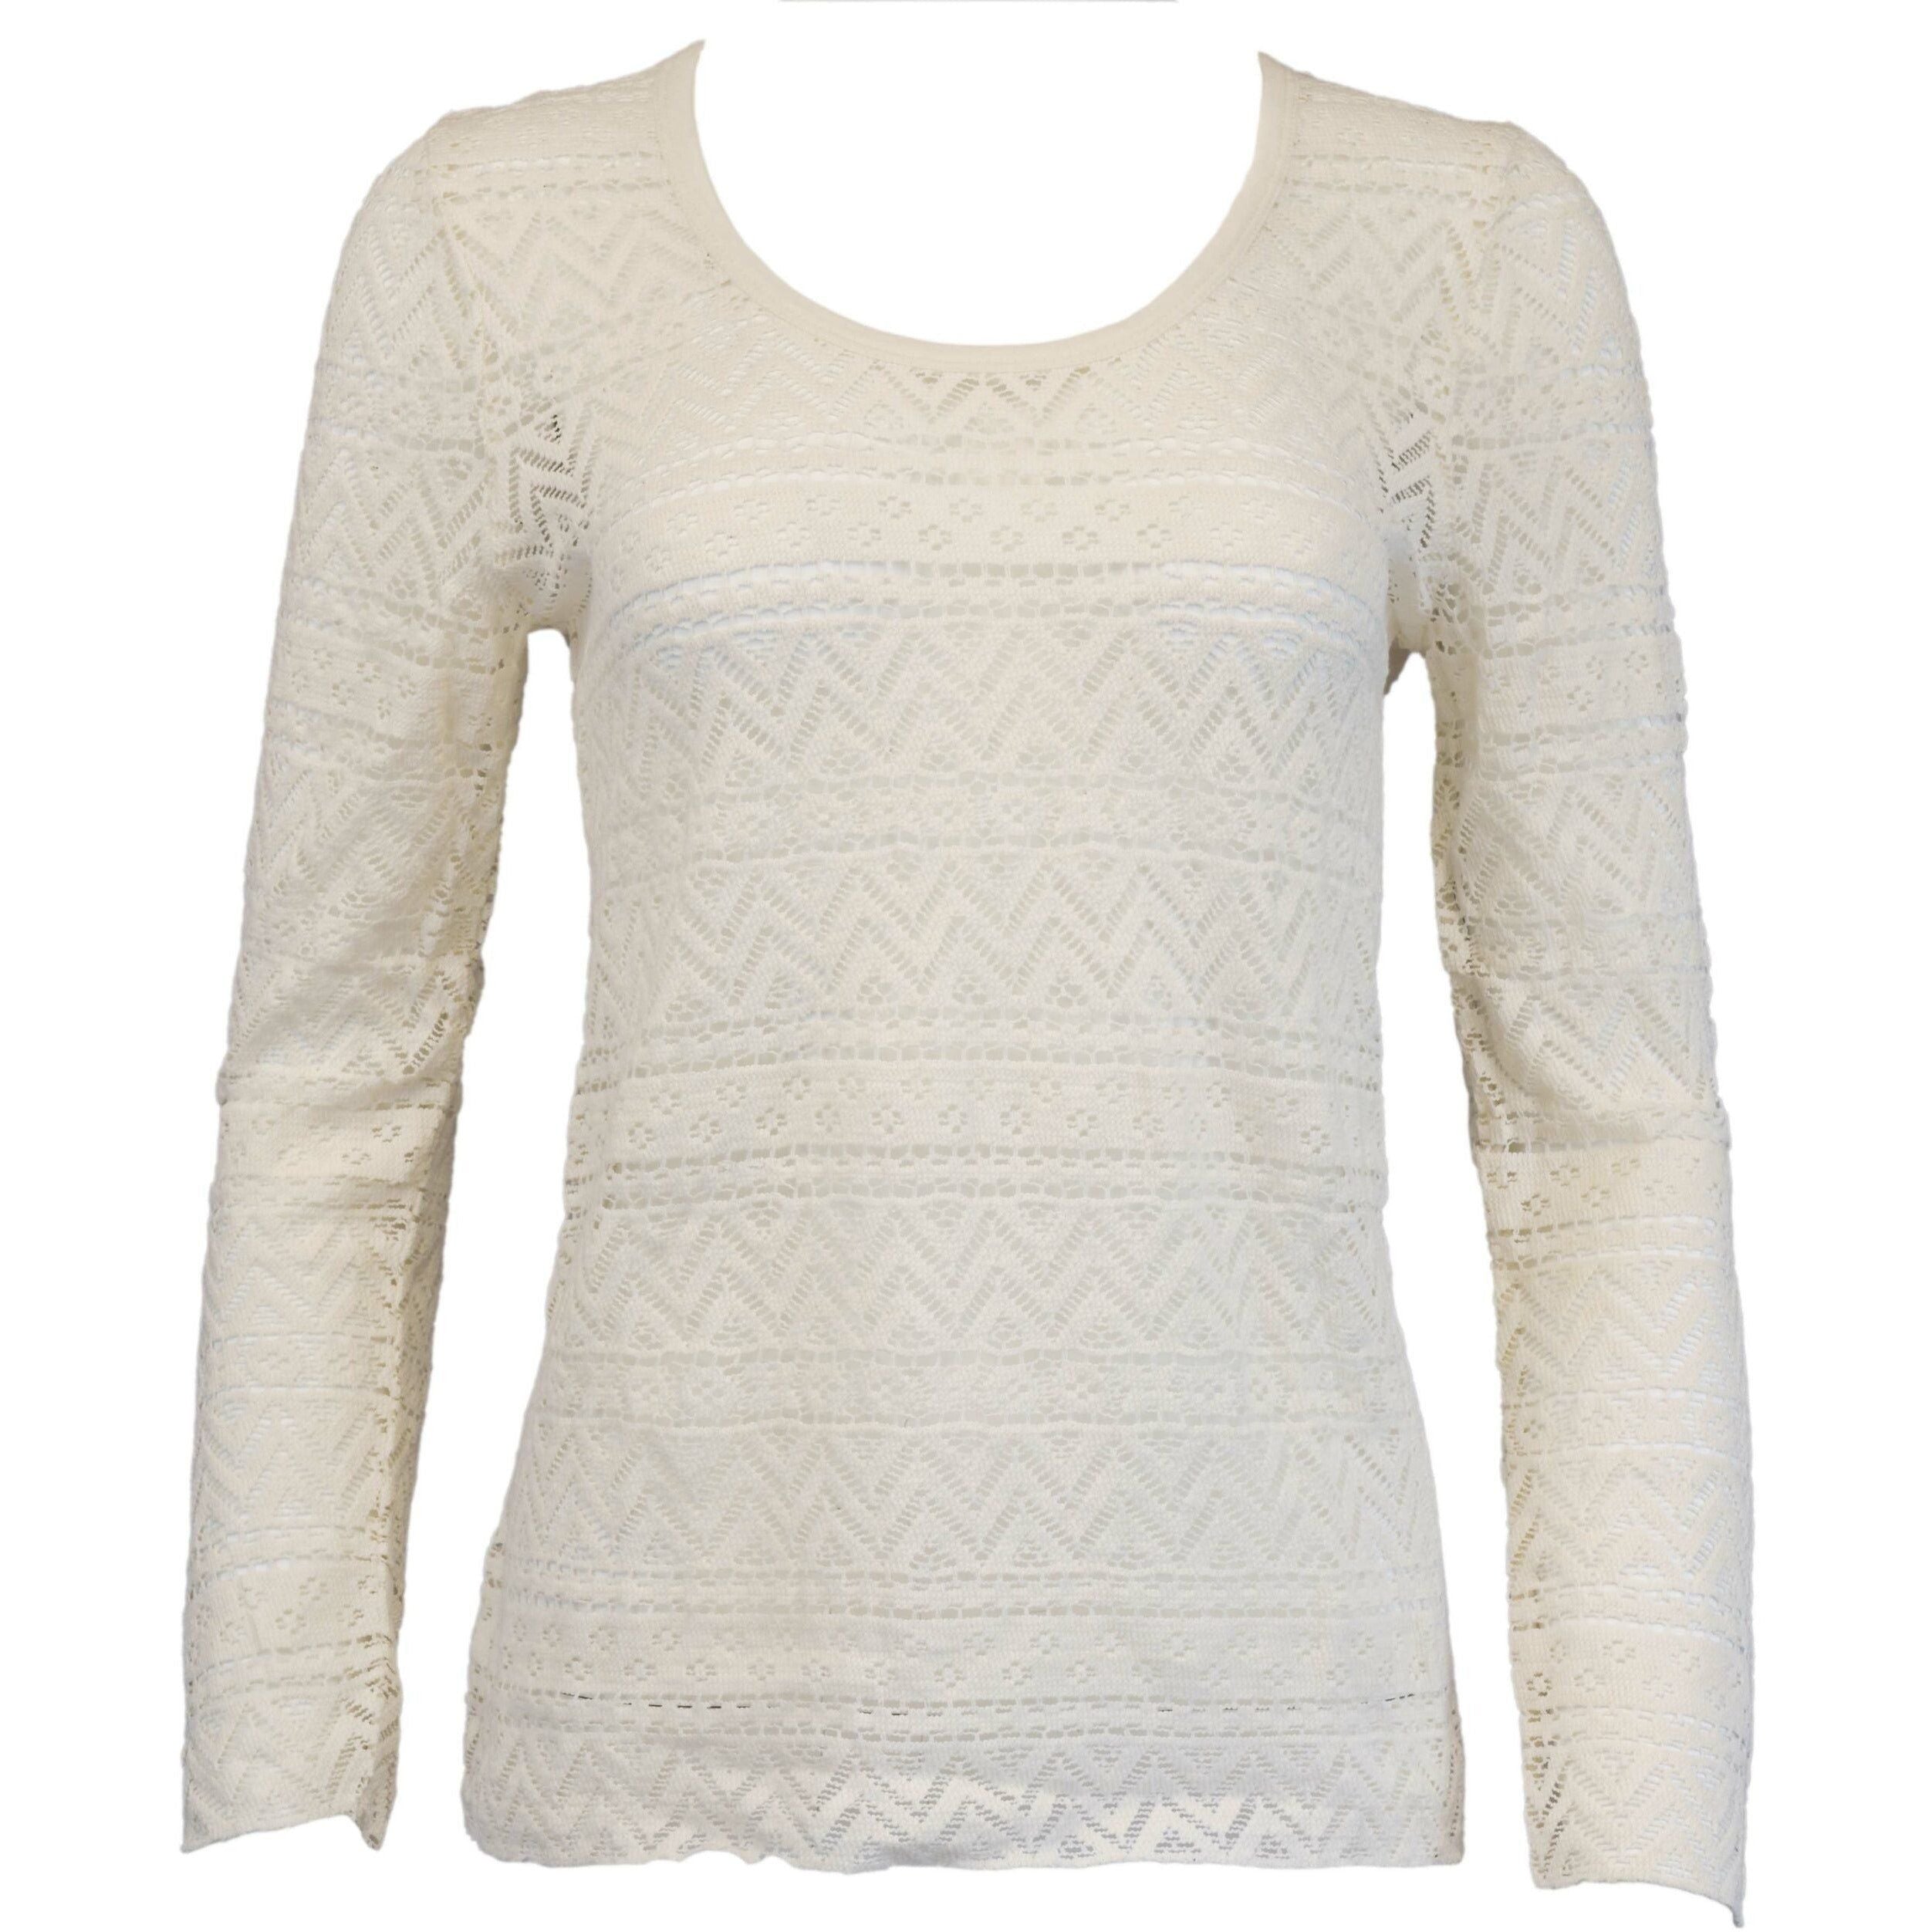 G.H. Bass & Co Women's Knitted Long Sleeve: Cozy elegance for women with fashionable comfort | Shop now!